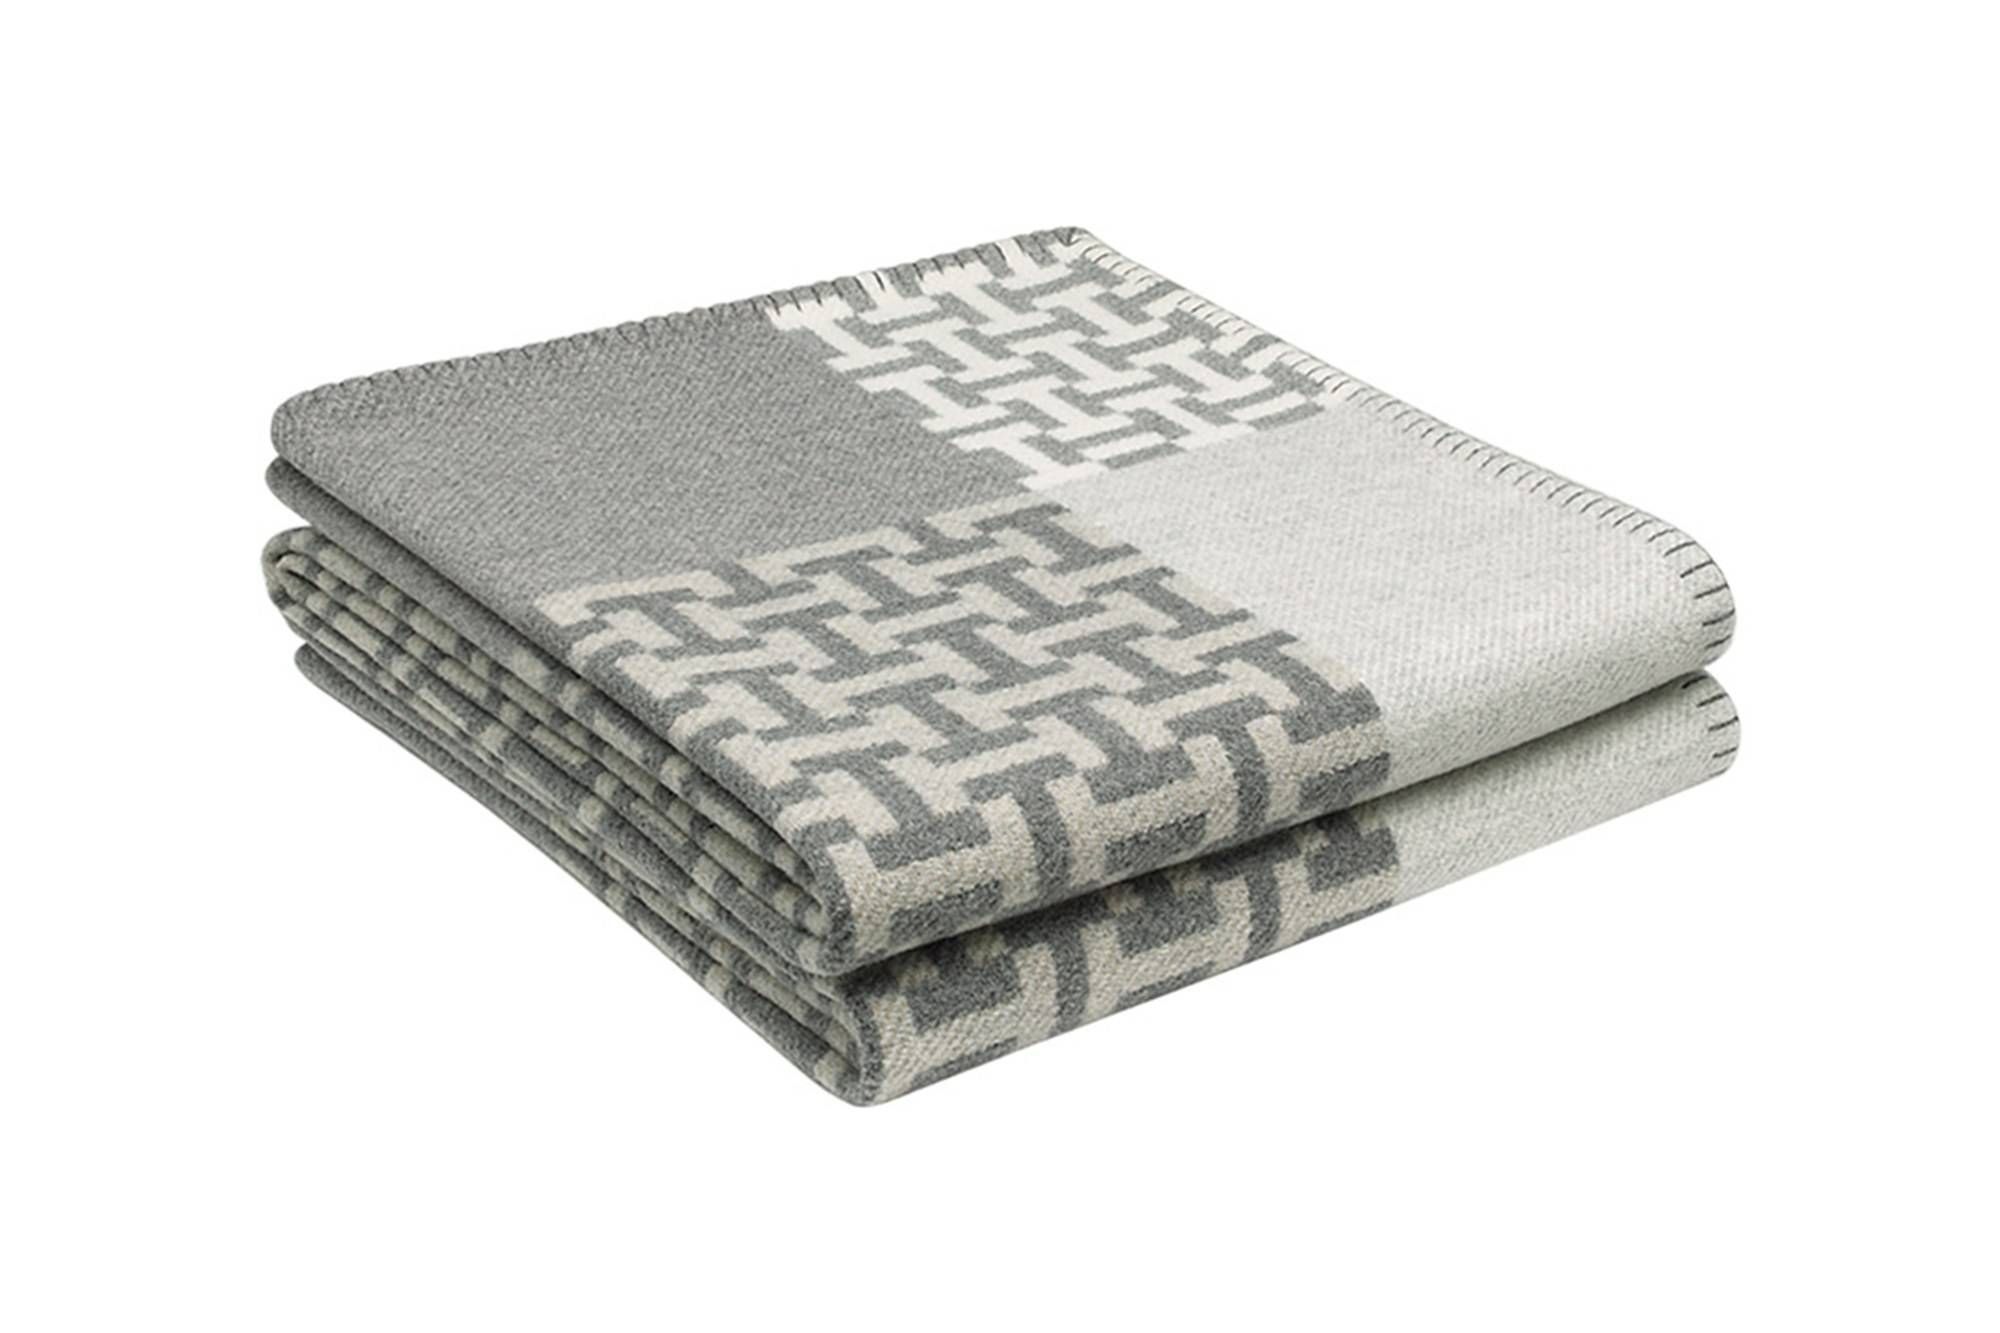 13 Manly Blankets That'll Make Your Place Less Boring Photos | Gq With Grey Throws For Sofas (View 20 of 30)